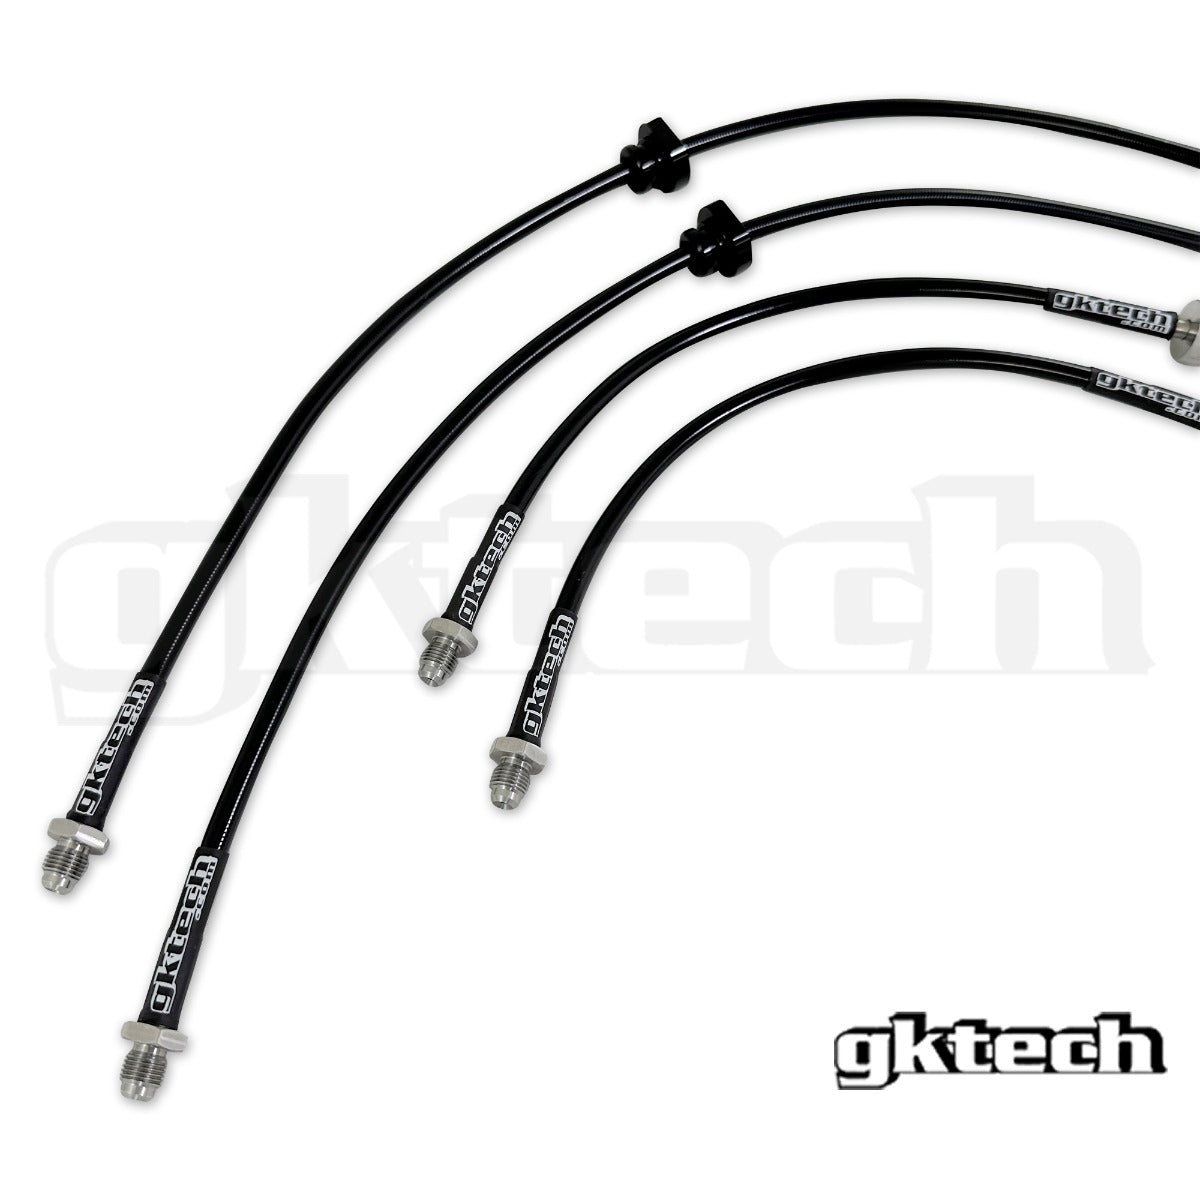 S14/S15 to Z32/Skyline conversion braided brake lines (Front & Rear set)